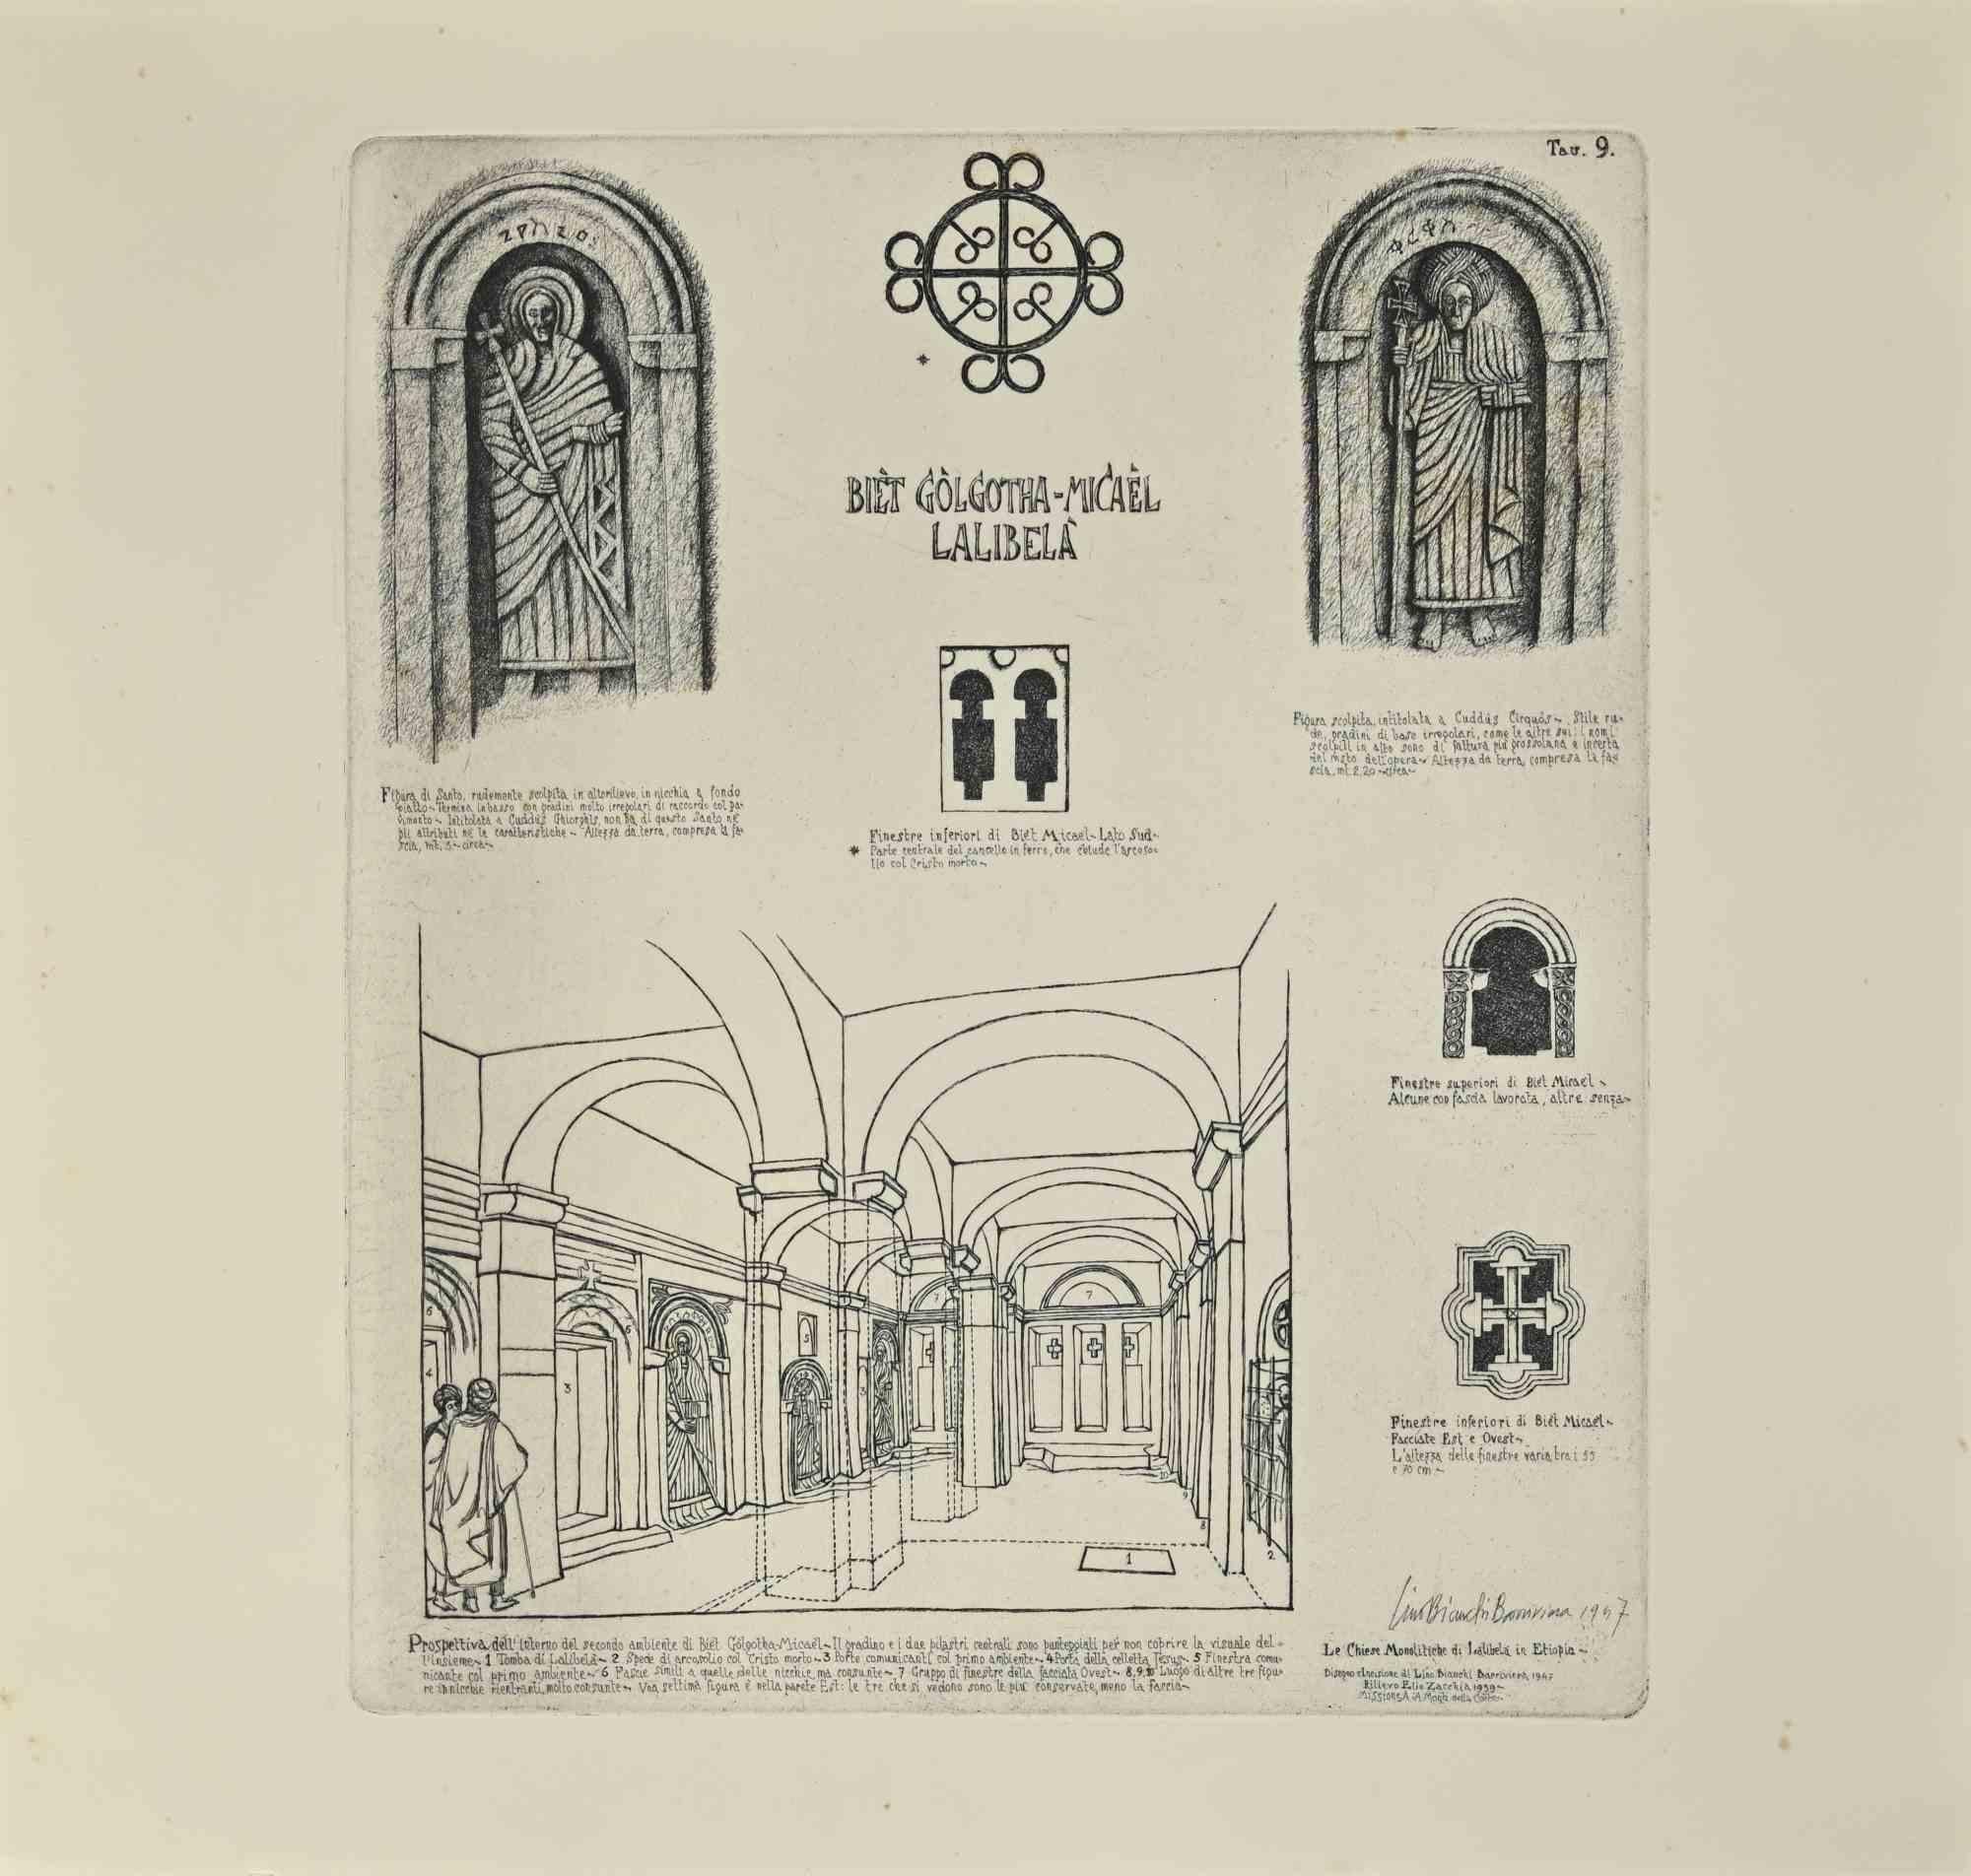 Internal perspective of Biet Golghotha-Micael is a modern artwork realized by Lino Bianchi Barriviera in 1947.

Black and white etching.

Signed and dated on plate.

Plate n.9 (as reported on the higher margin).

The artwork is from the series "The